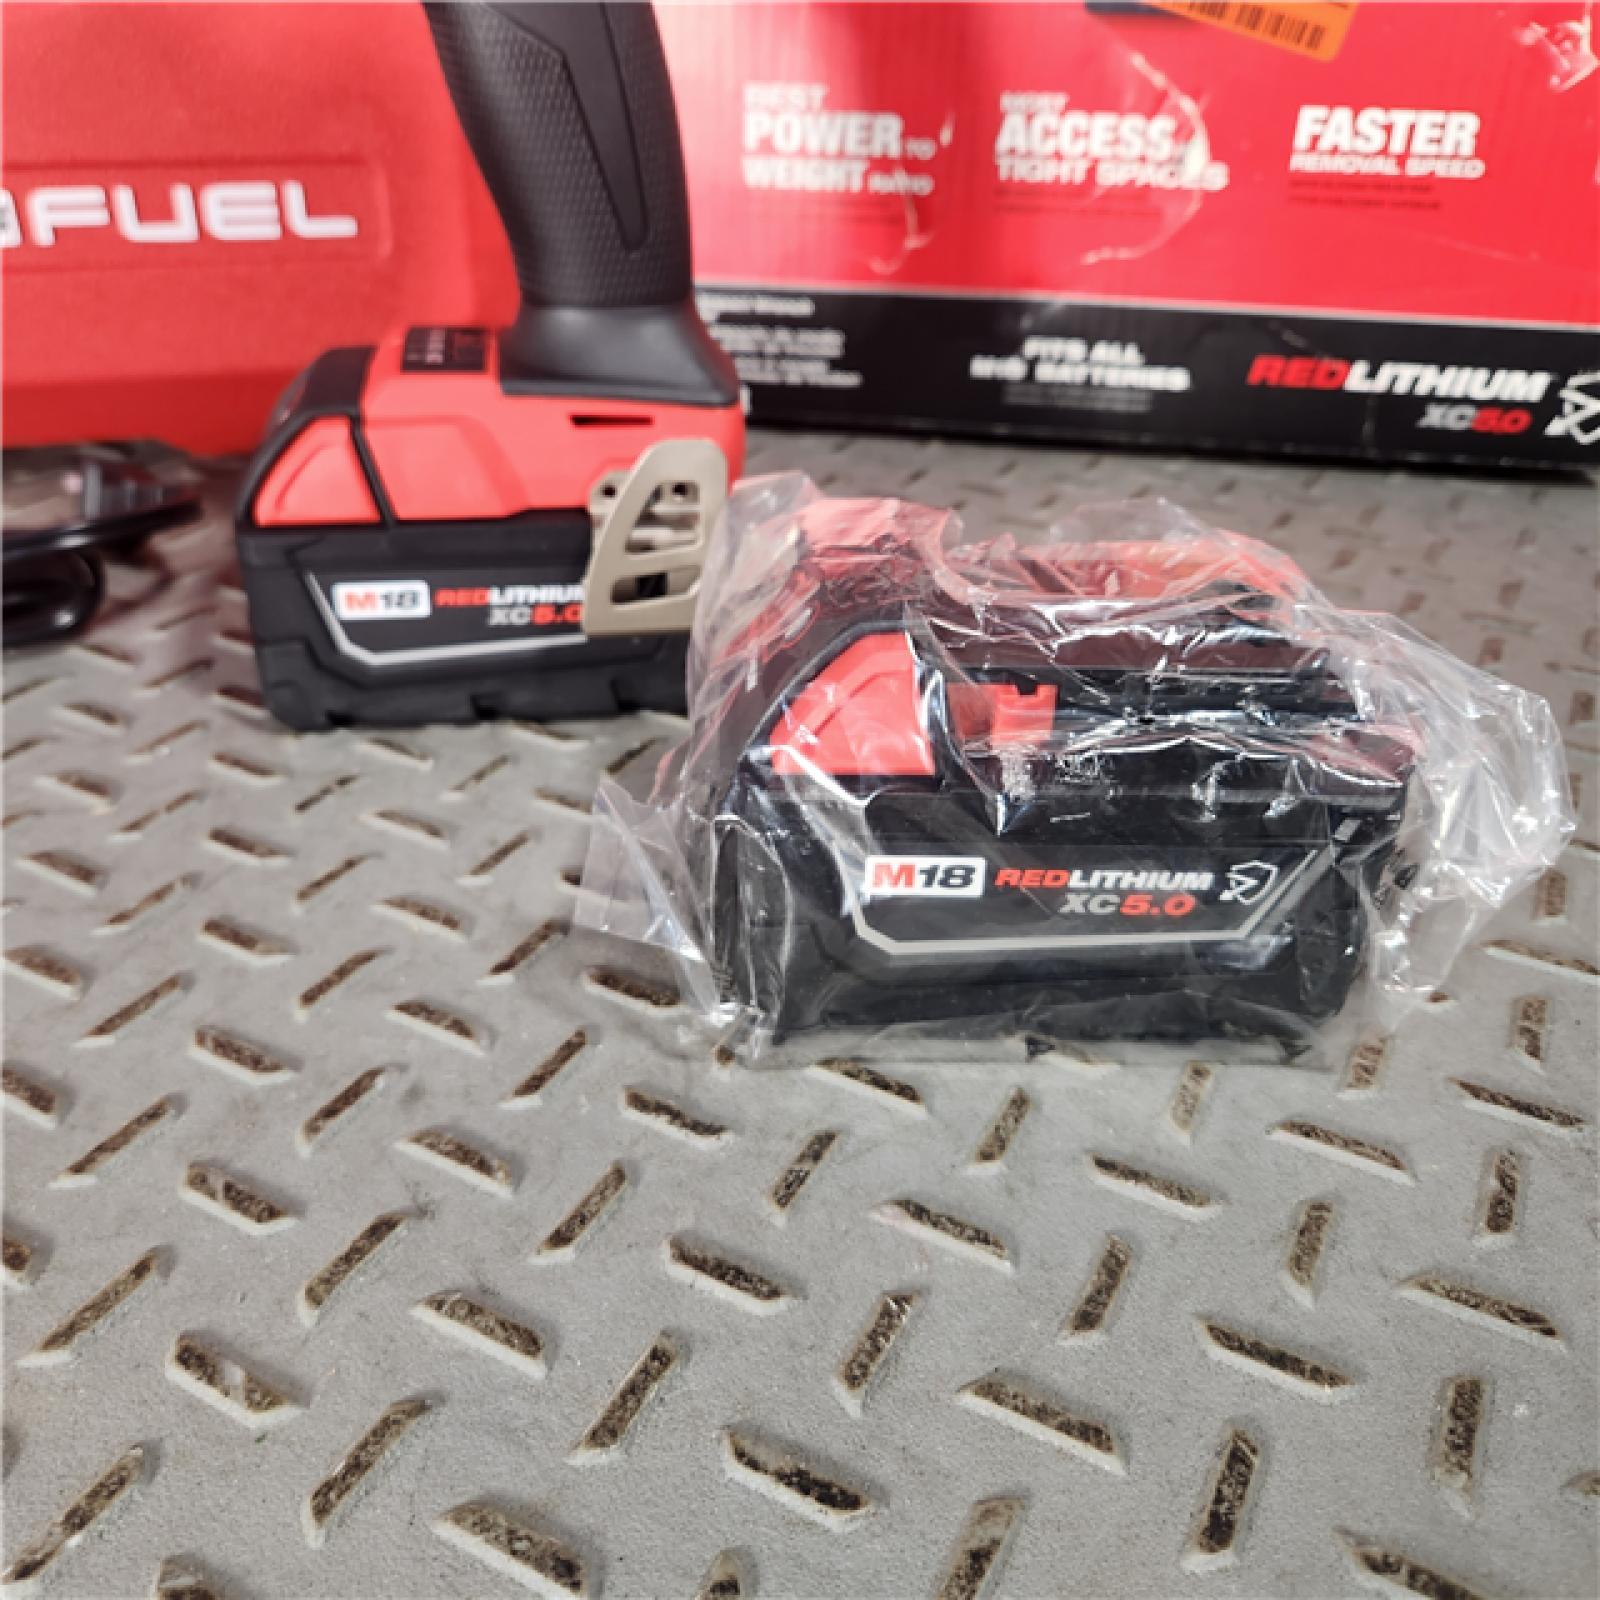 Houston Location - AS-IS Milwaukee 2960-22R M18 Fuel 3/8  Mid-Torque Impact Wrench W/ Friction Ring Kit - Appears IN LIKE NEW Condition